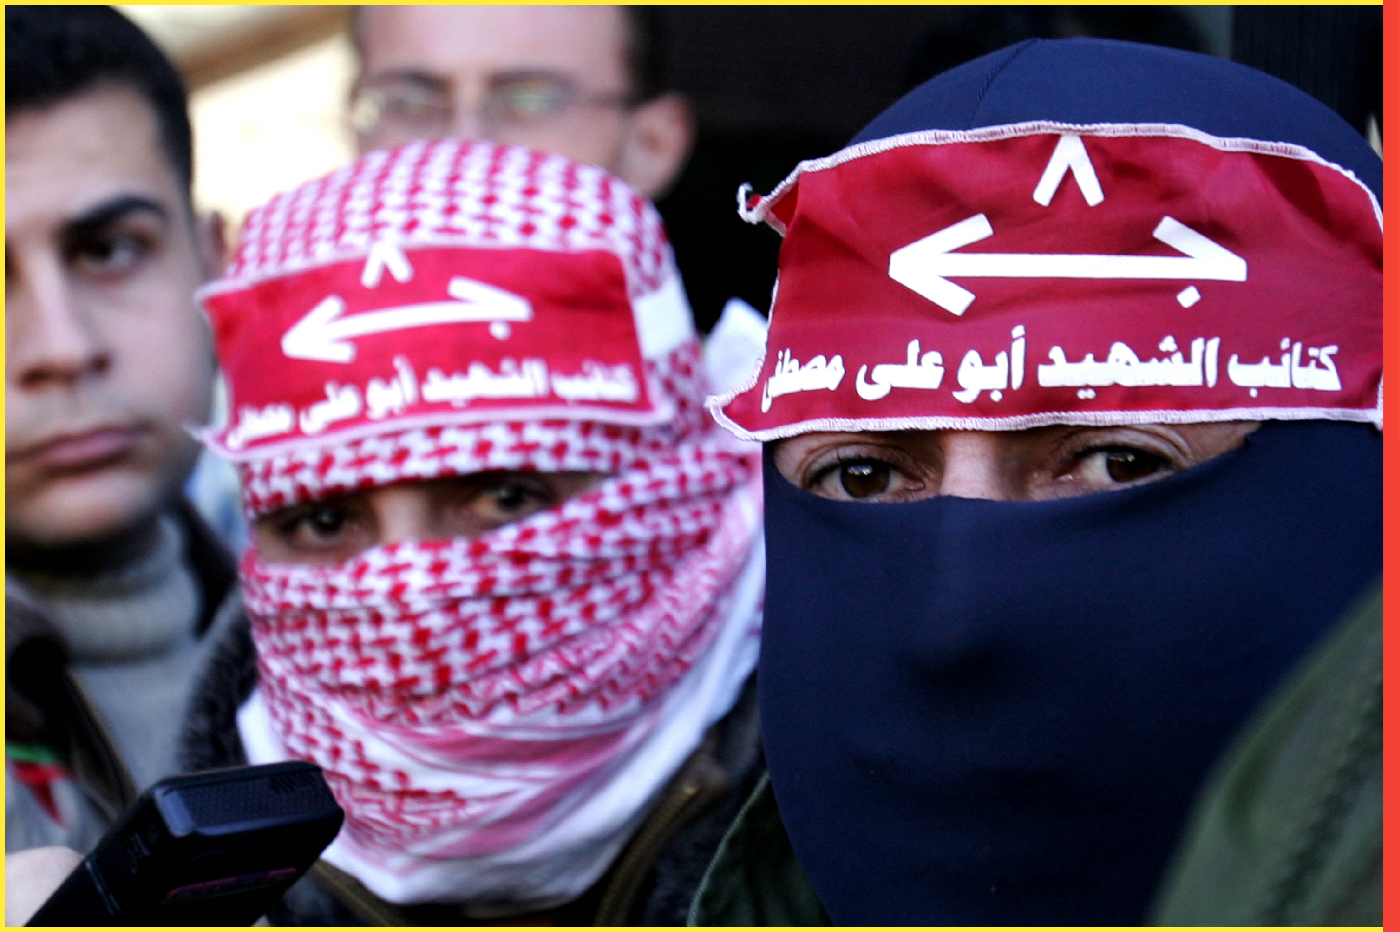 GAZA, GAZA STRIP - FEBRUARY 04: Masked gunmen attend a press conference while Abu Thaer (not pictured) a Palestinian spokesman of the Al-Aqsa Brigades the military wing of the Palestinian president Mahmoud Abbas movement Fatah, speaks to the media in Gaza City on February 4, 2008 to claim joint responsibility with Abu Ali Mustafa Brigades, a military wing of the Popular Front for the Liberation of Palestine (PFLP), for the suicide bombing at a shopping centre in the Israeli desert town of Dimona. A Palestinian suicide bomber blew himself up and police shot dead his accomplice in an attack in a shopping centre in southern Israel on Monday that killed at least one Israeli, emergency services said. (Photo by Abid Katib/Getty Images)